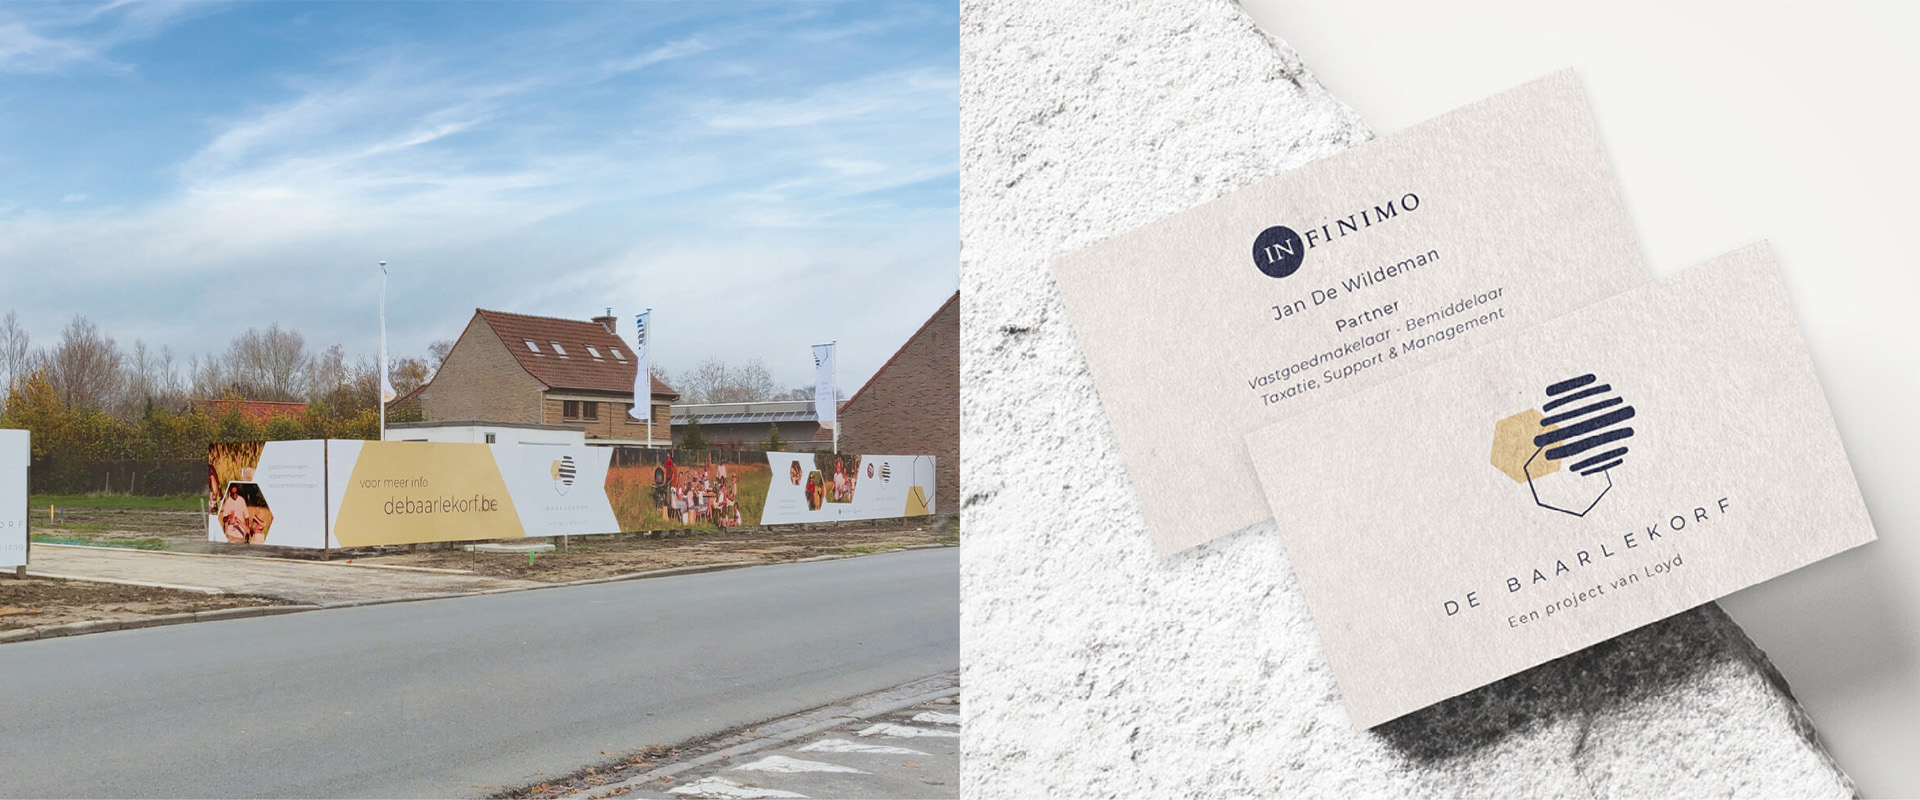 Mockup of business cards and construction site banners for De baarlekorf